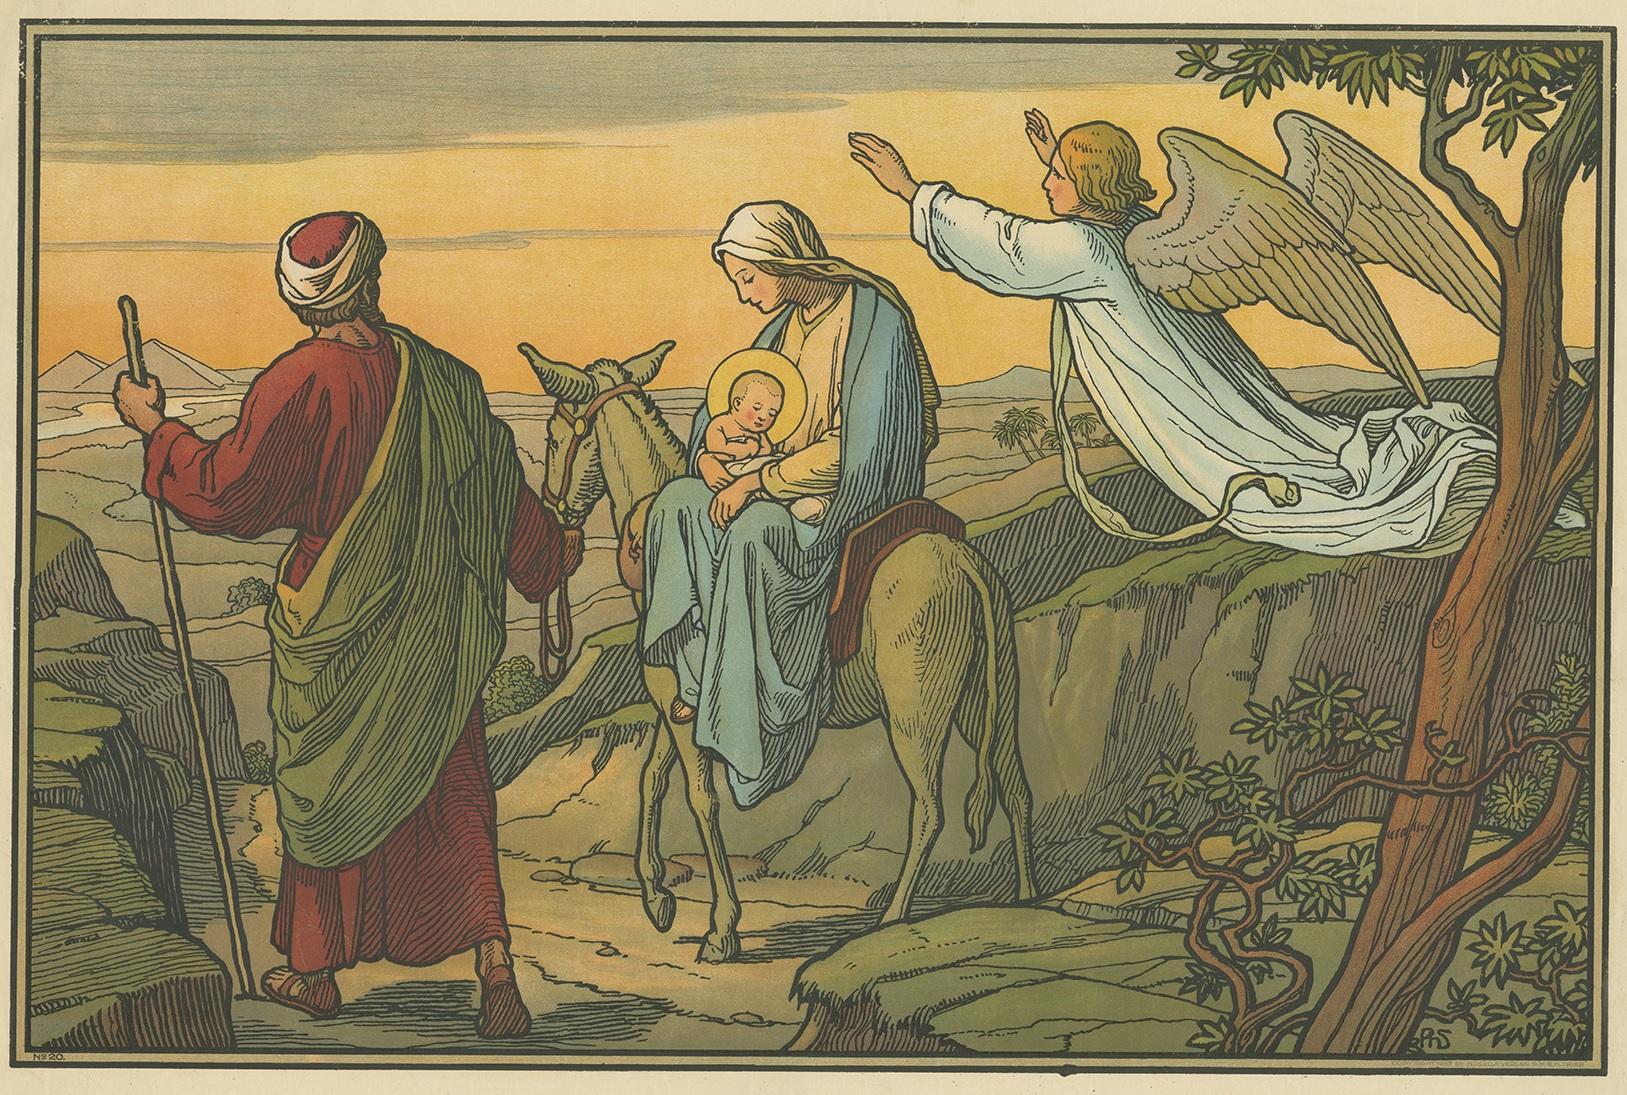 Large antique print of the Flight into Egypt. Published by Mosella-Verlag, 1913. This print originates from a series titled 'Kathol. Schulbibelwerk von Dr. Ecker'.